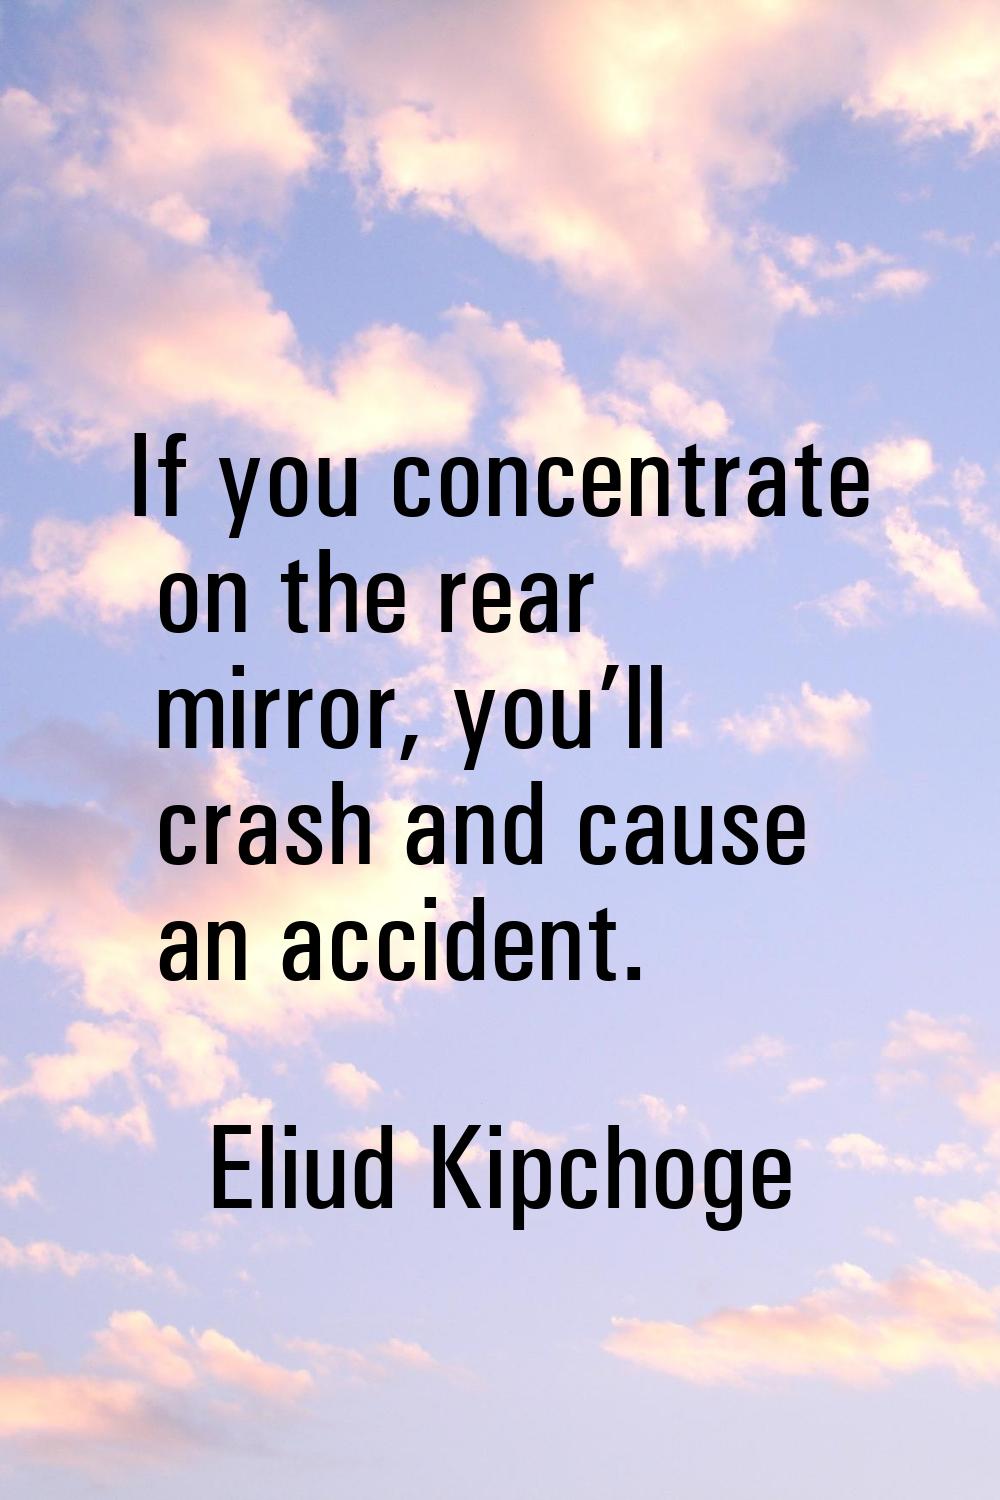 If you concentrate on the rear mirror, you’ll crash and cause an accident.